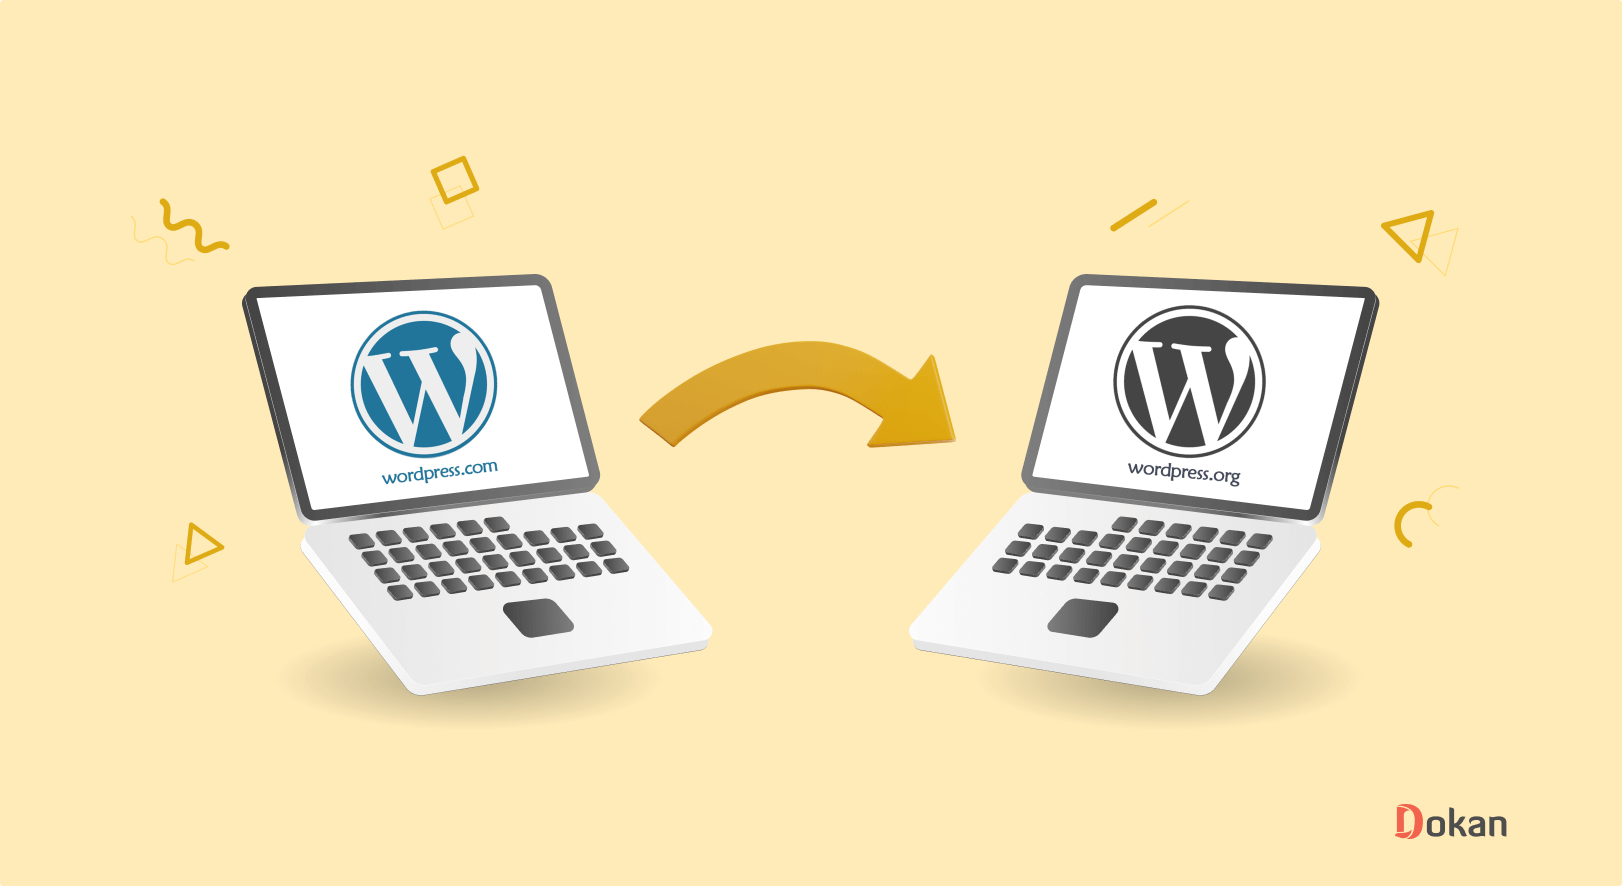 How to Move Site from WordPress.com to WordPress.org